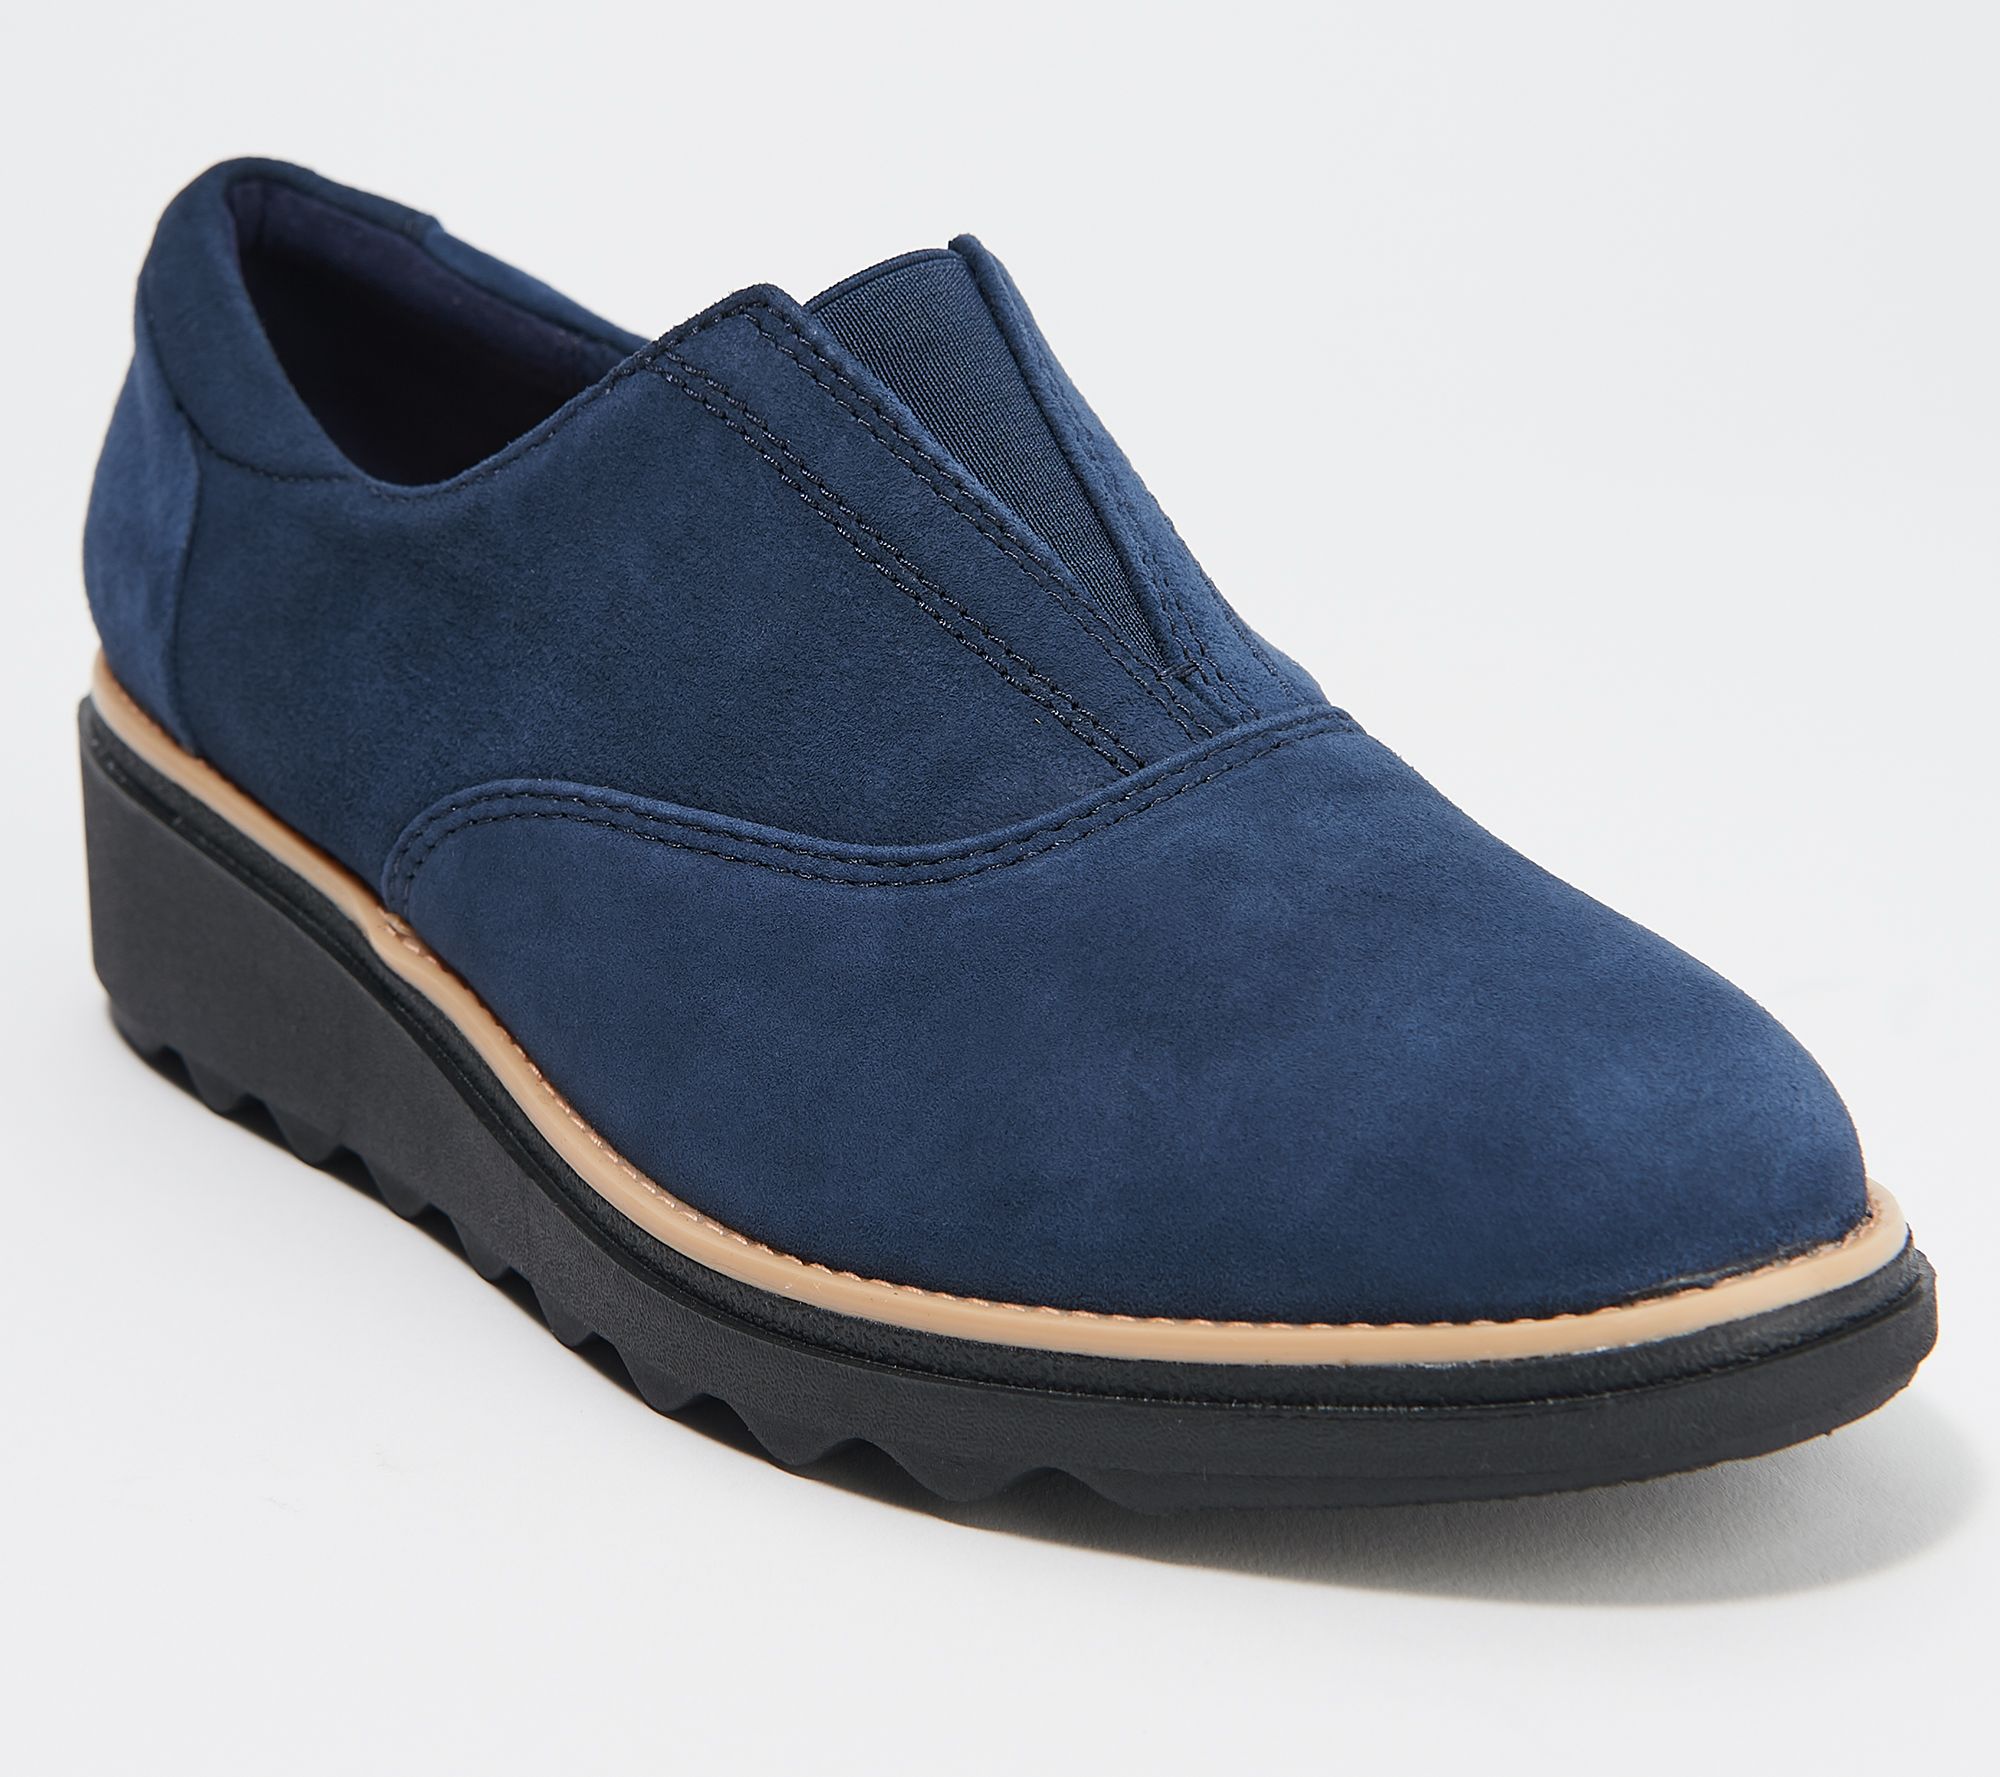 Clarks Collection Suede Slip-On Shoes - Sharon Sail - QVC.com